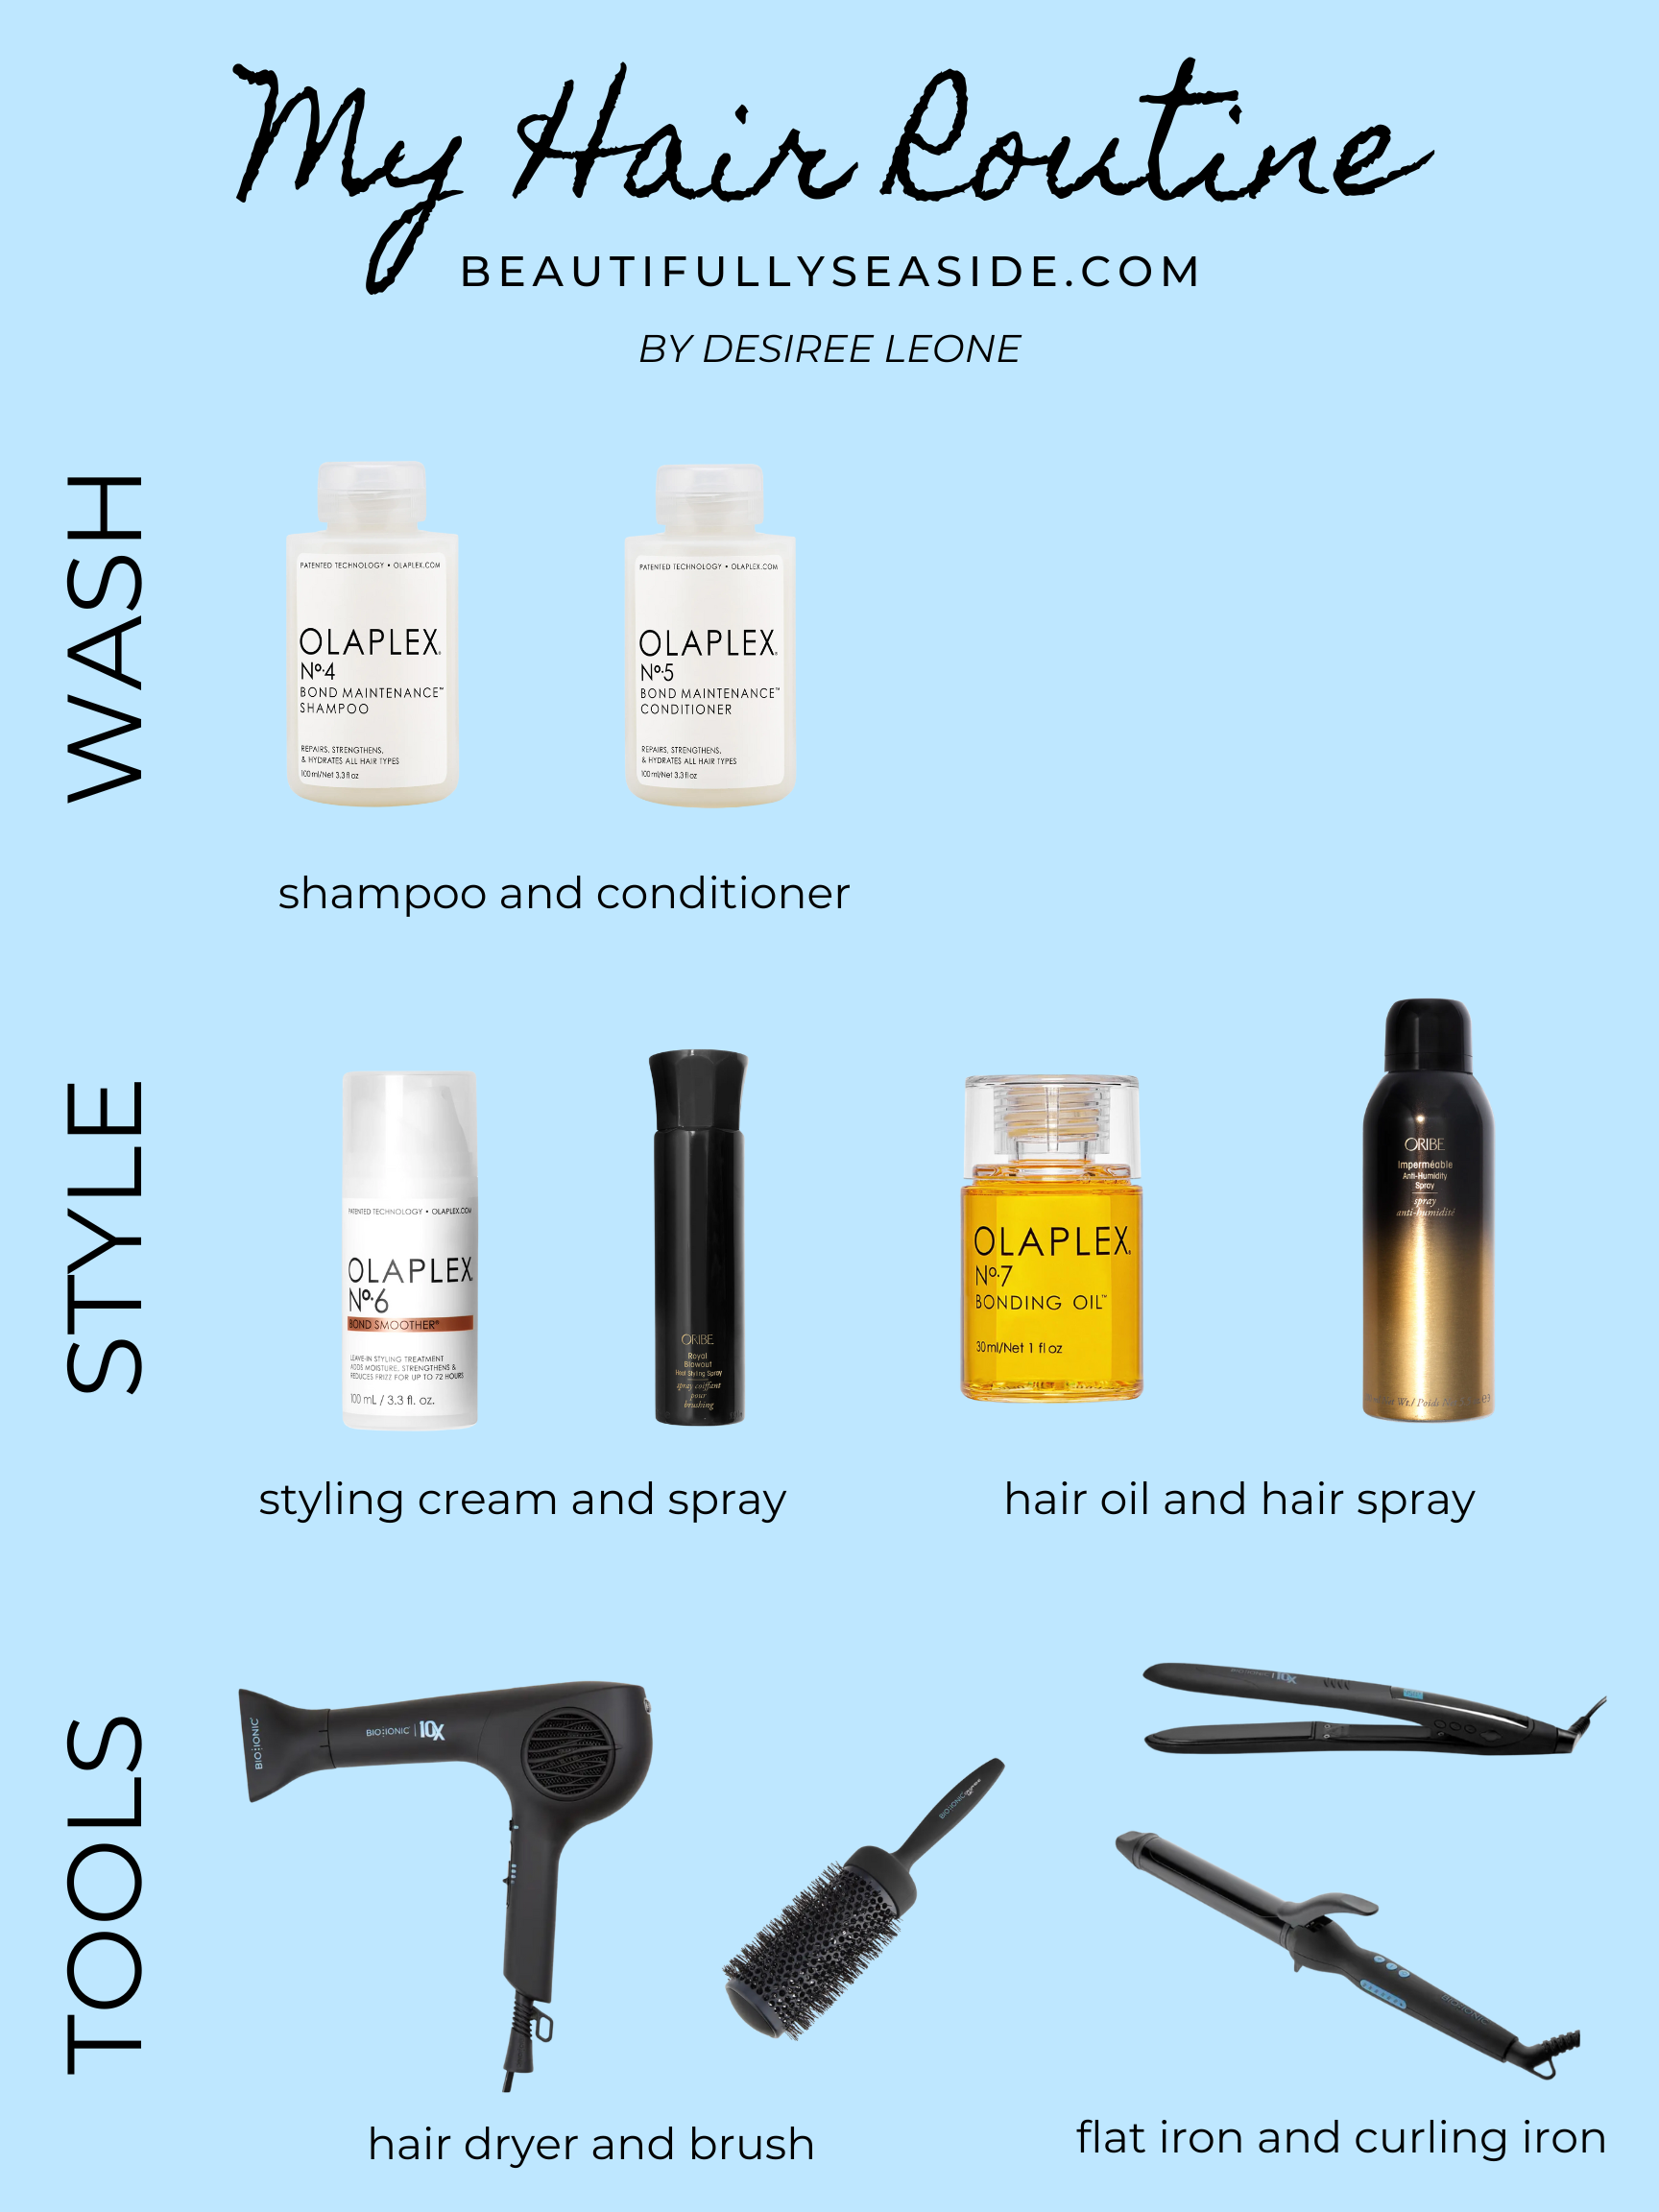 Desiree Leone shares her hair routine and products she uses every time she styles her hair.